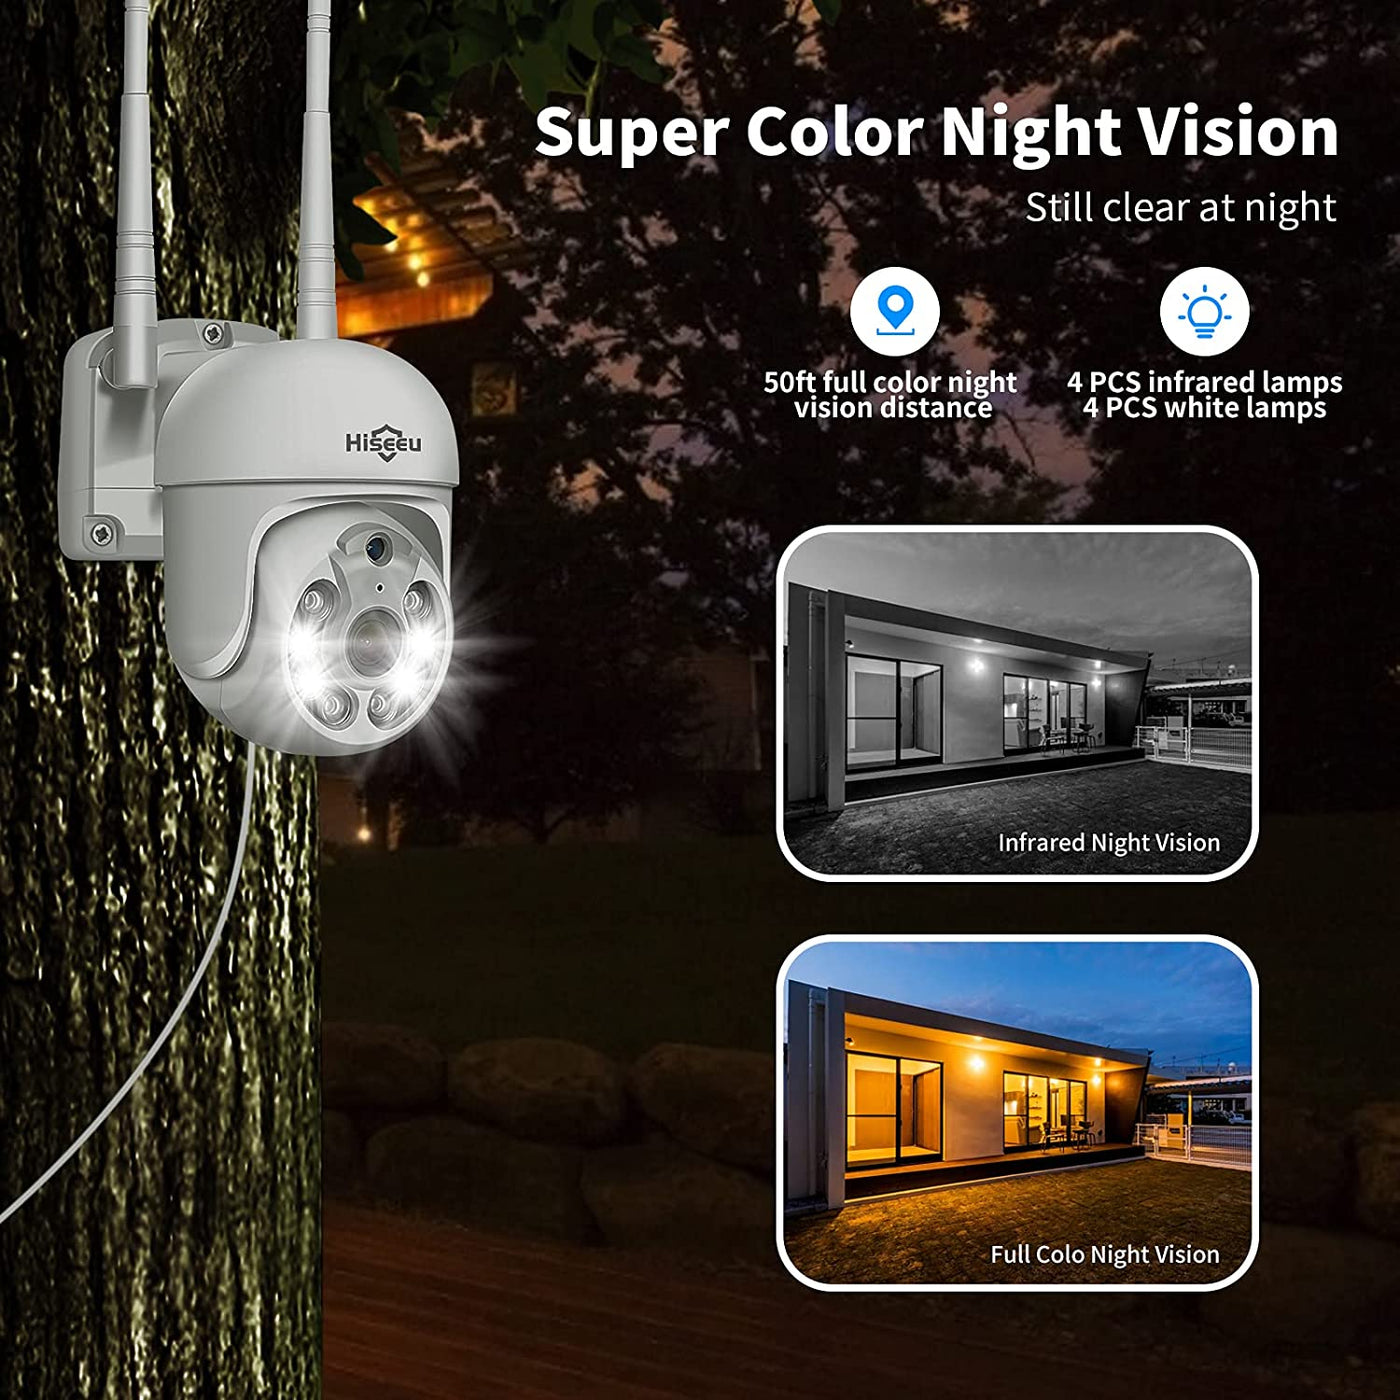 【2K,Pan/Tilt/ Control】 Hiseeu AI Human Detection Wireless Security Camera System,Two Way Audio, Color Night Vision,Mobile&PC Remote,Outdoor IP66 Waterproof, 7/24/Motion Record,Motion Alert（refurbished）